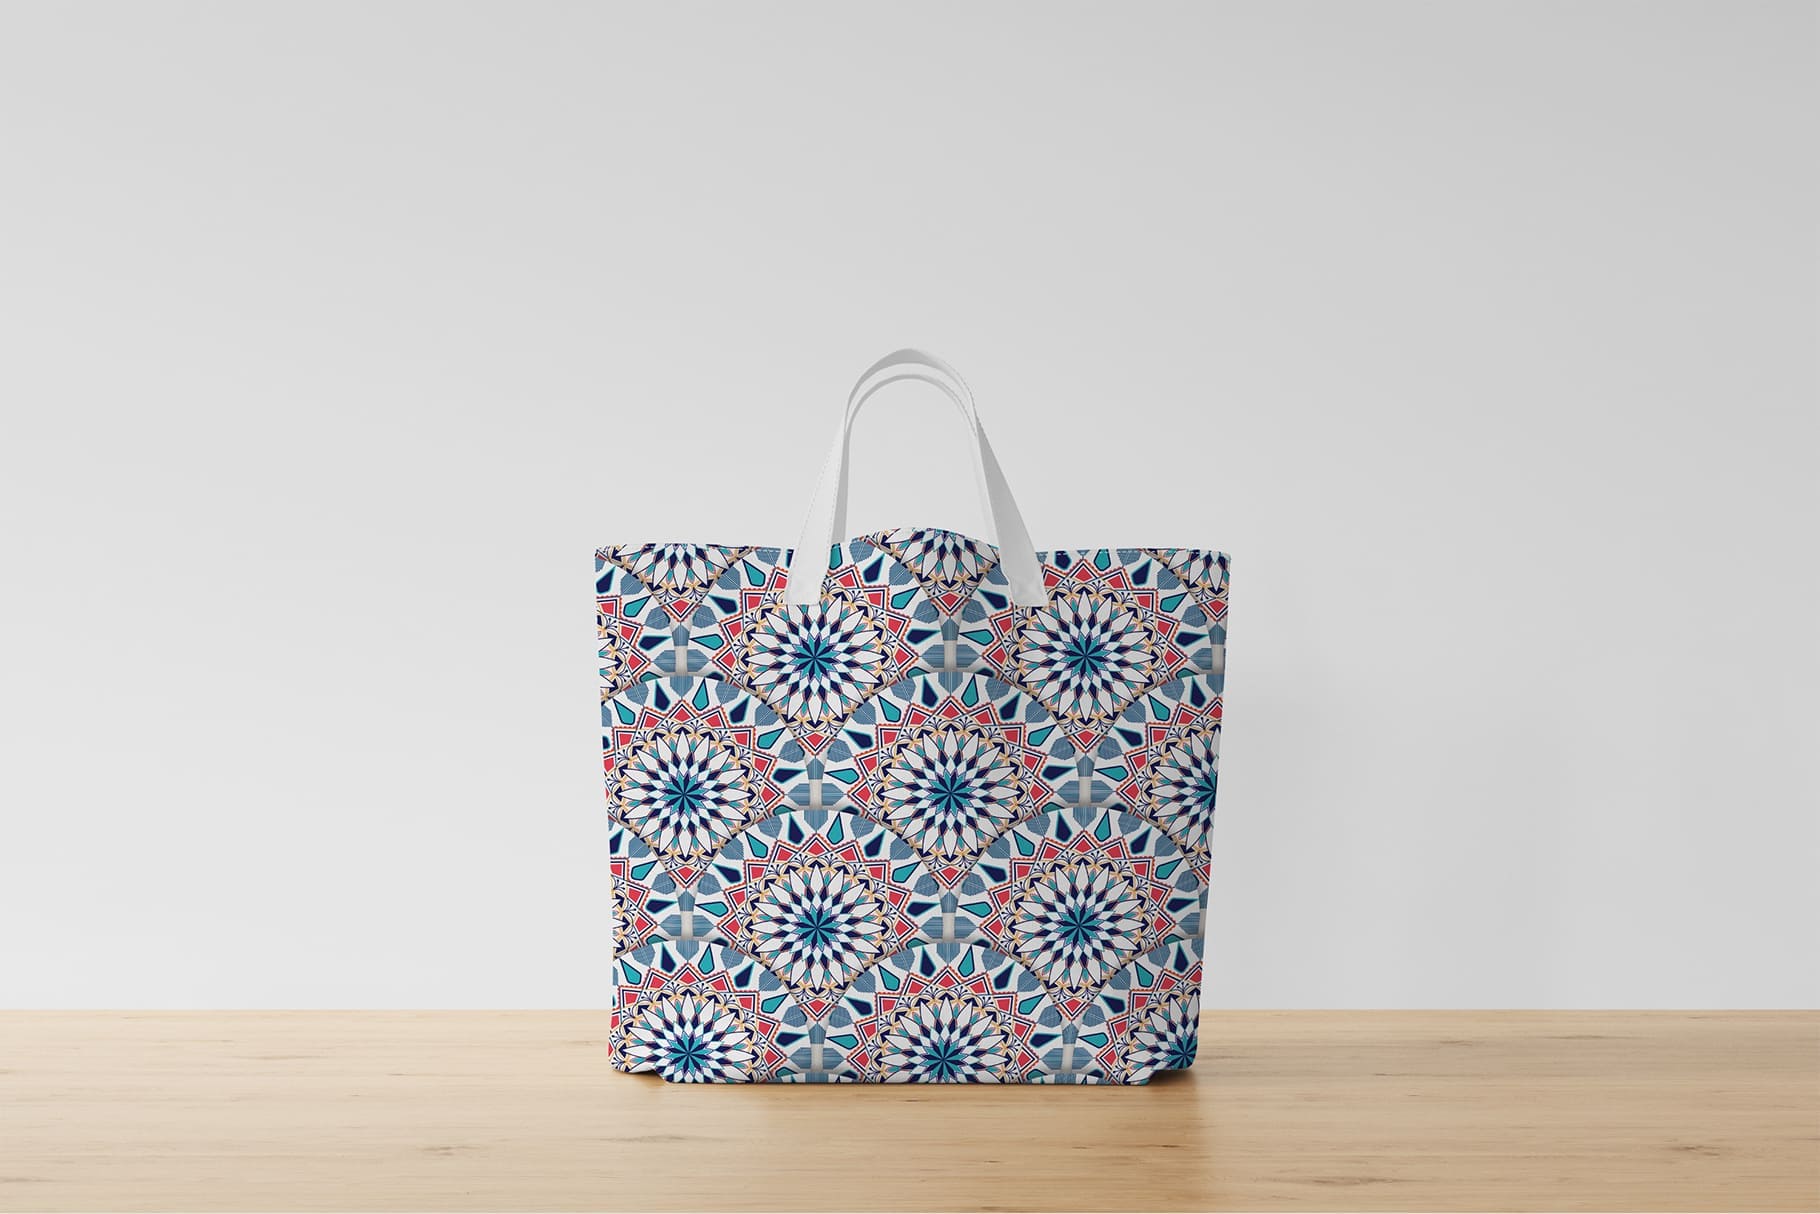 Summer bag in blue with a mandala image.